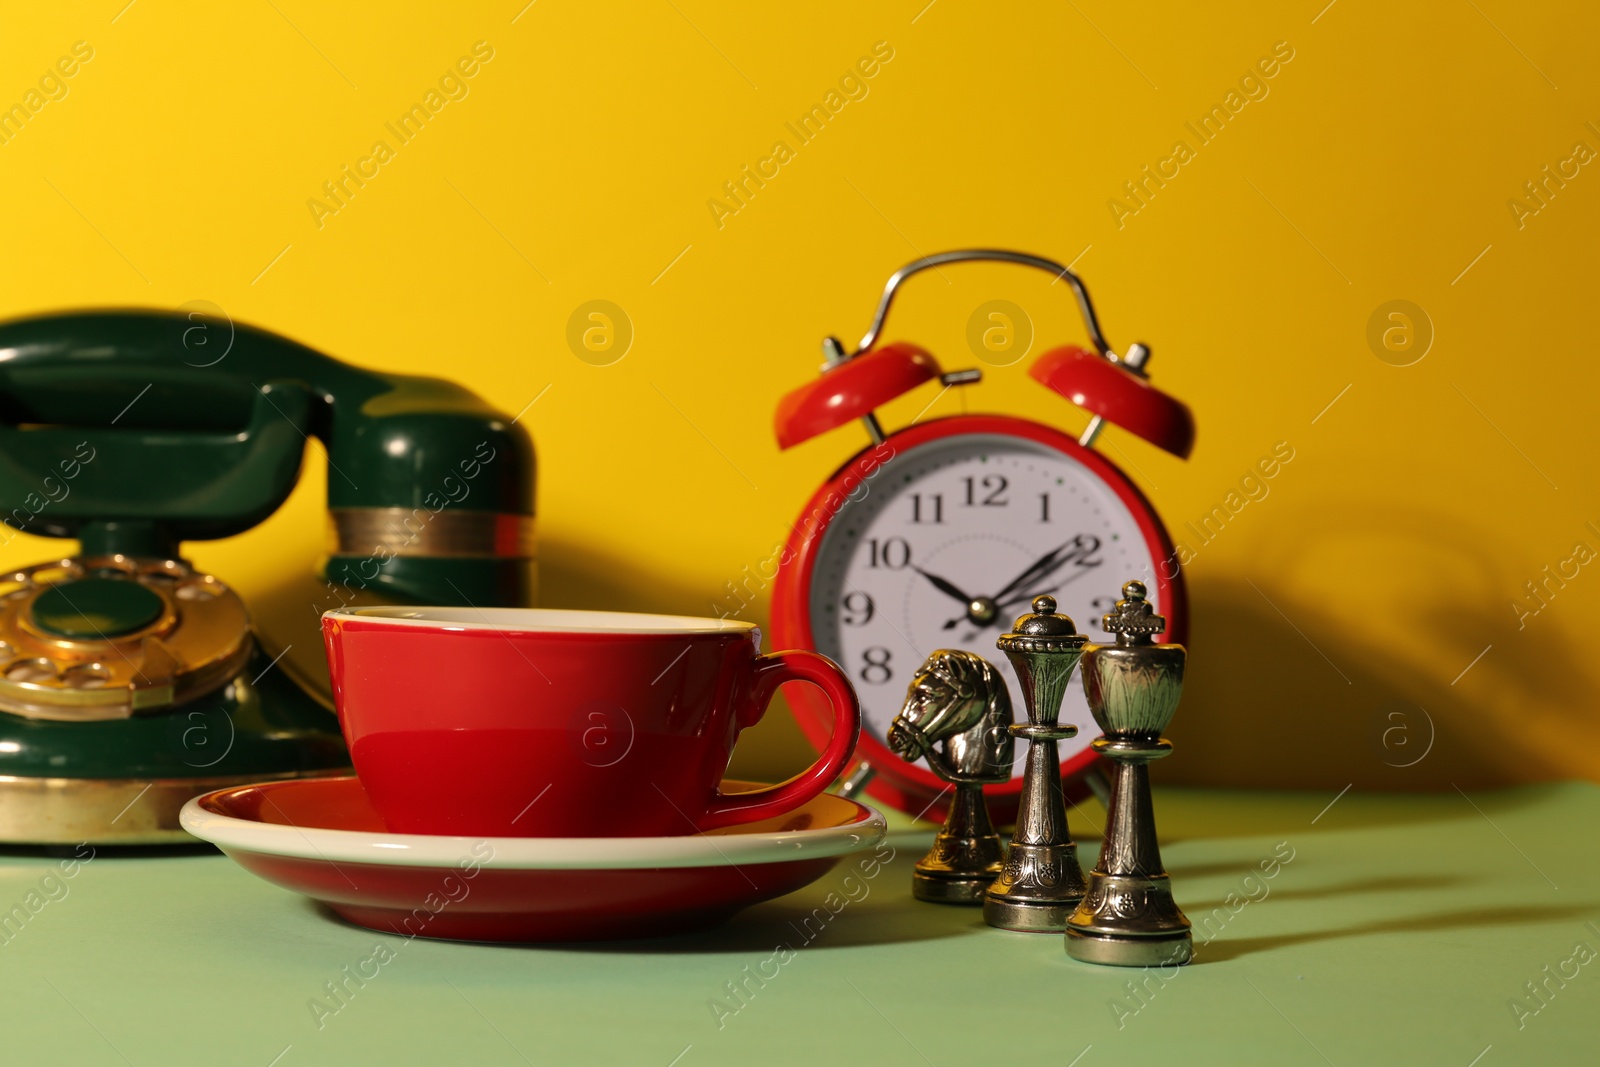 Photo of Red cup with saucer, alarm clock, vintage telephone and chessmen on light green table against yellow background